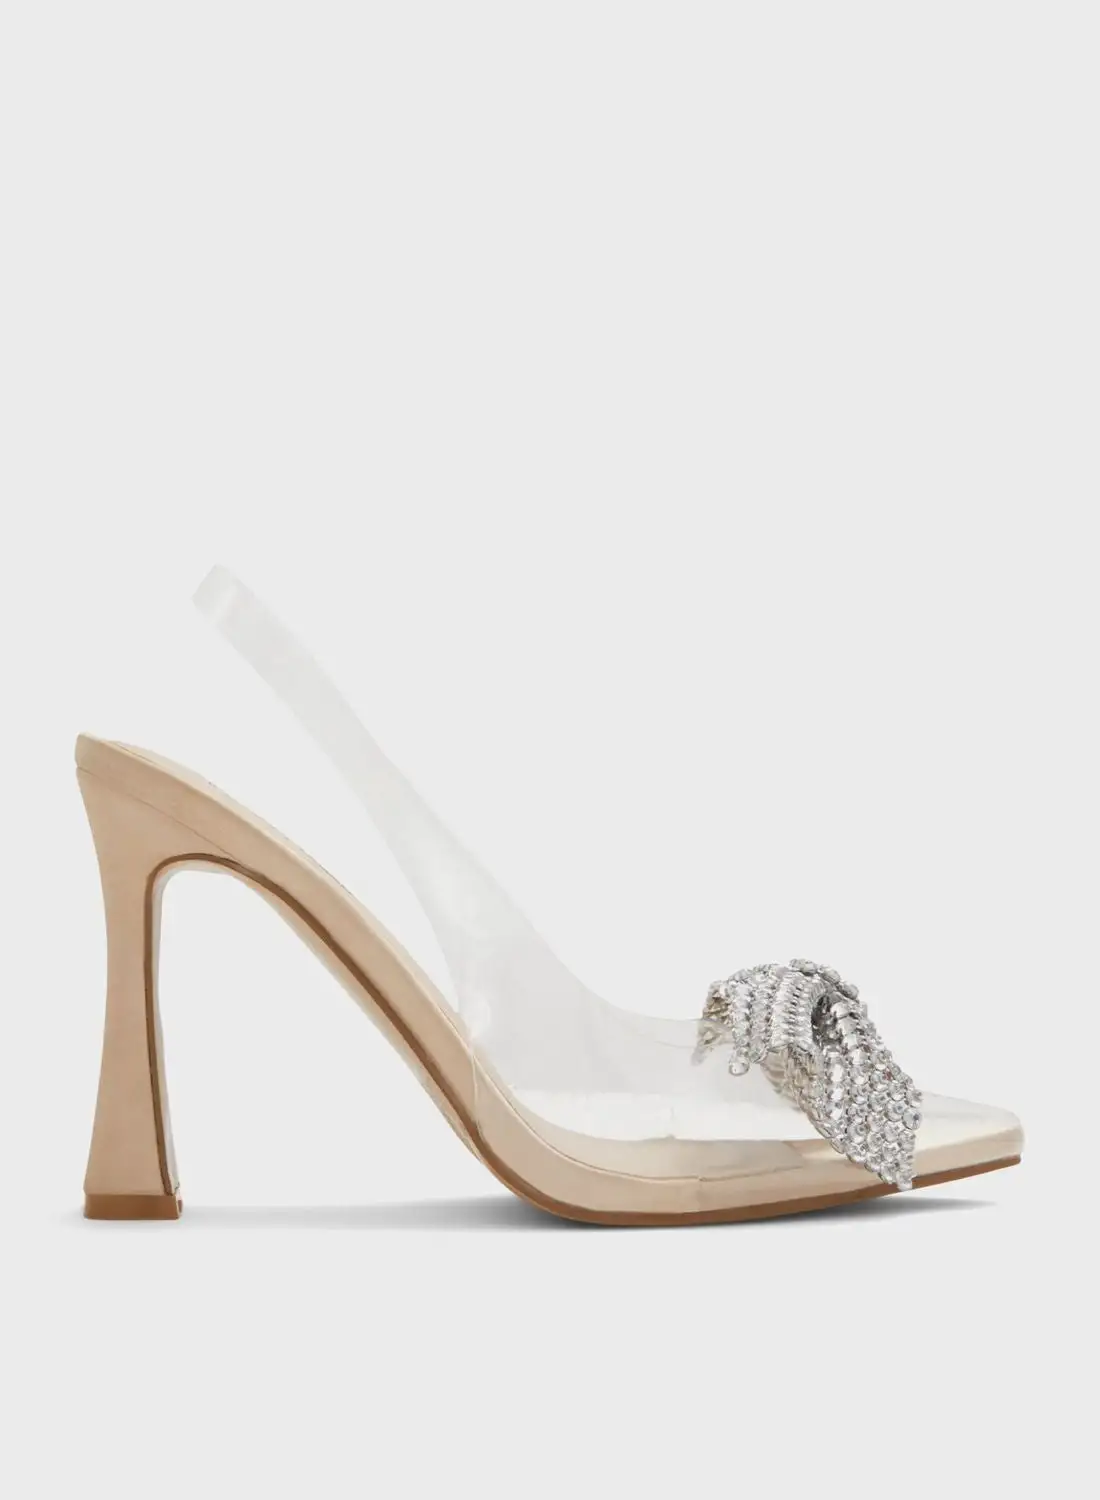 CALL IT SPRING Jazzelle Pumps